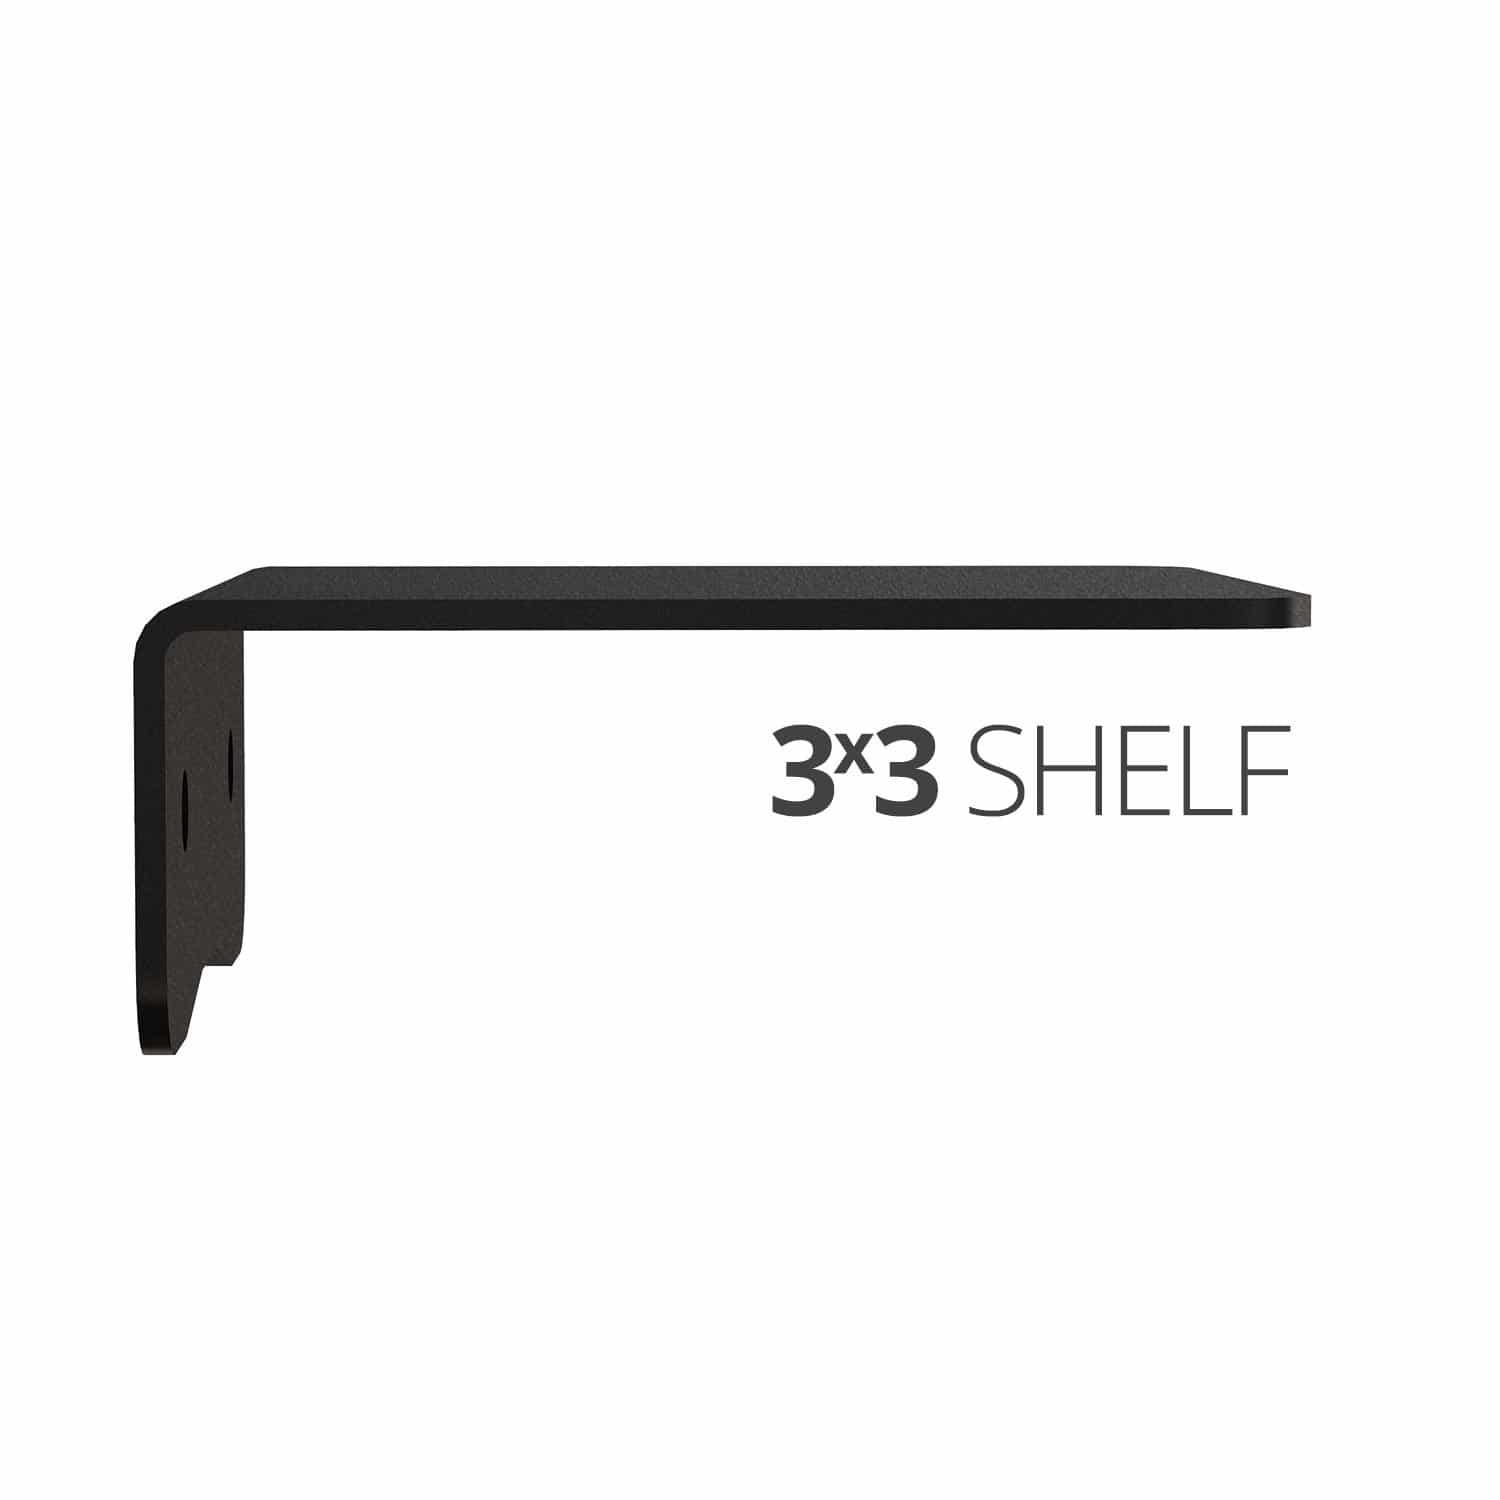 Small wall mounted shelf for home, office and garage - 3x3 side